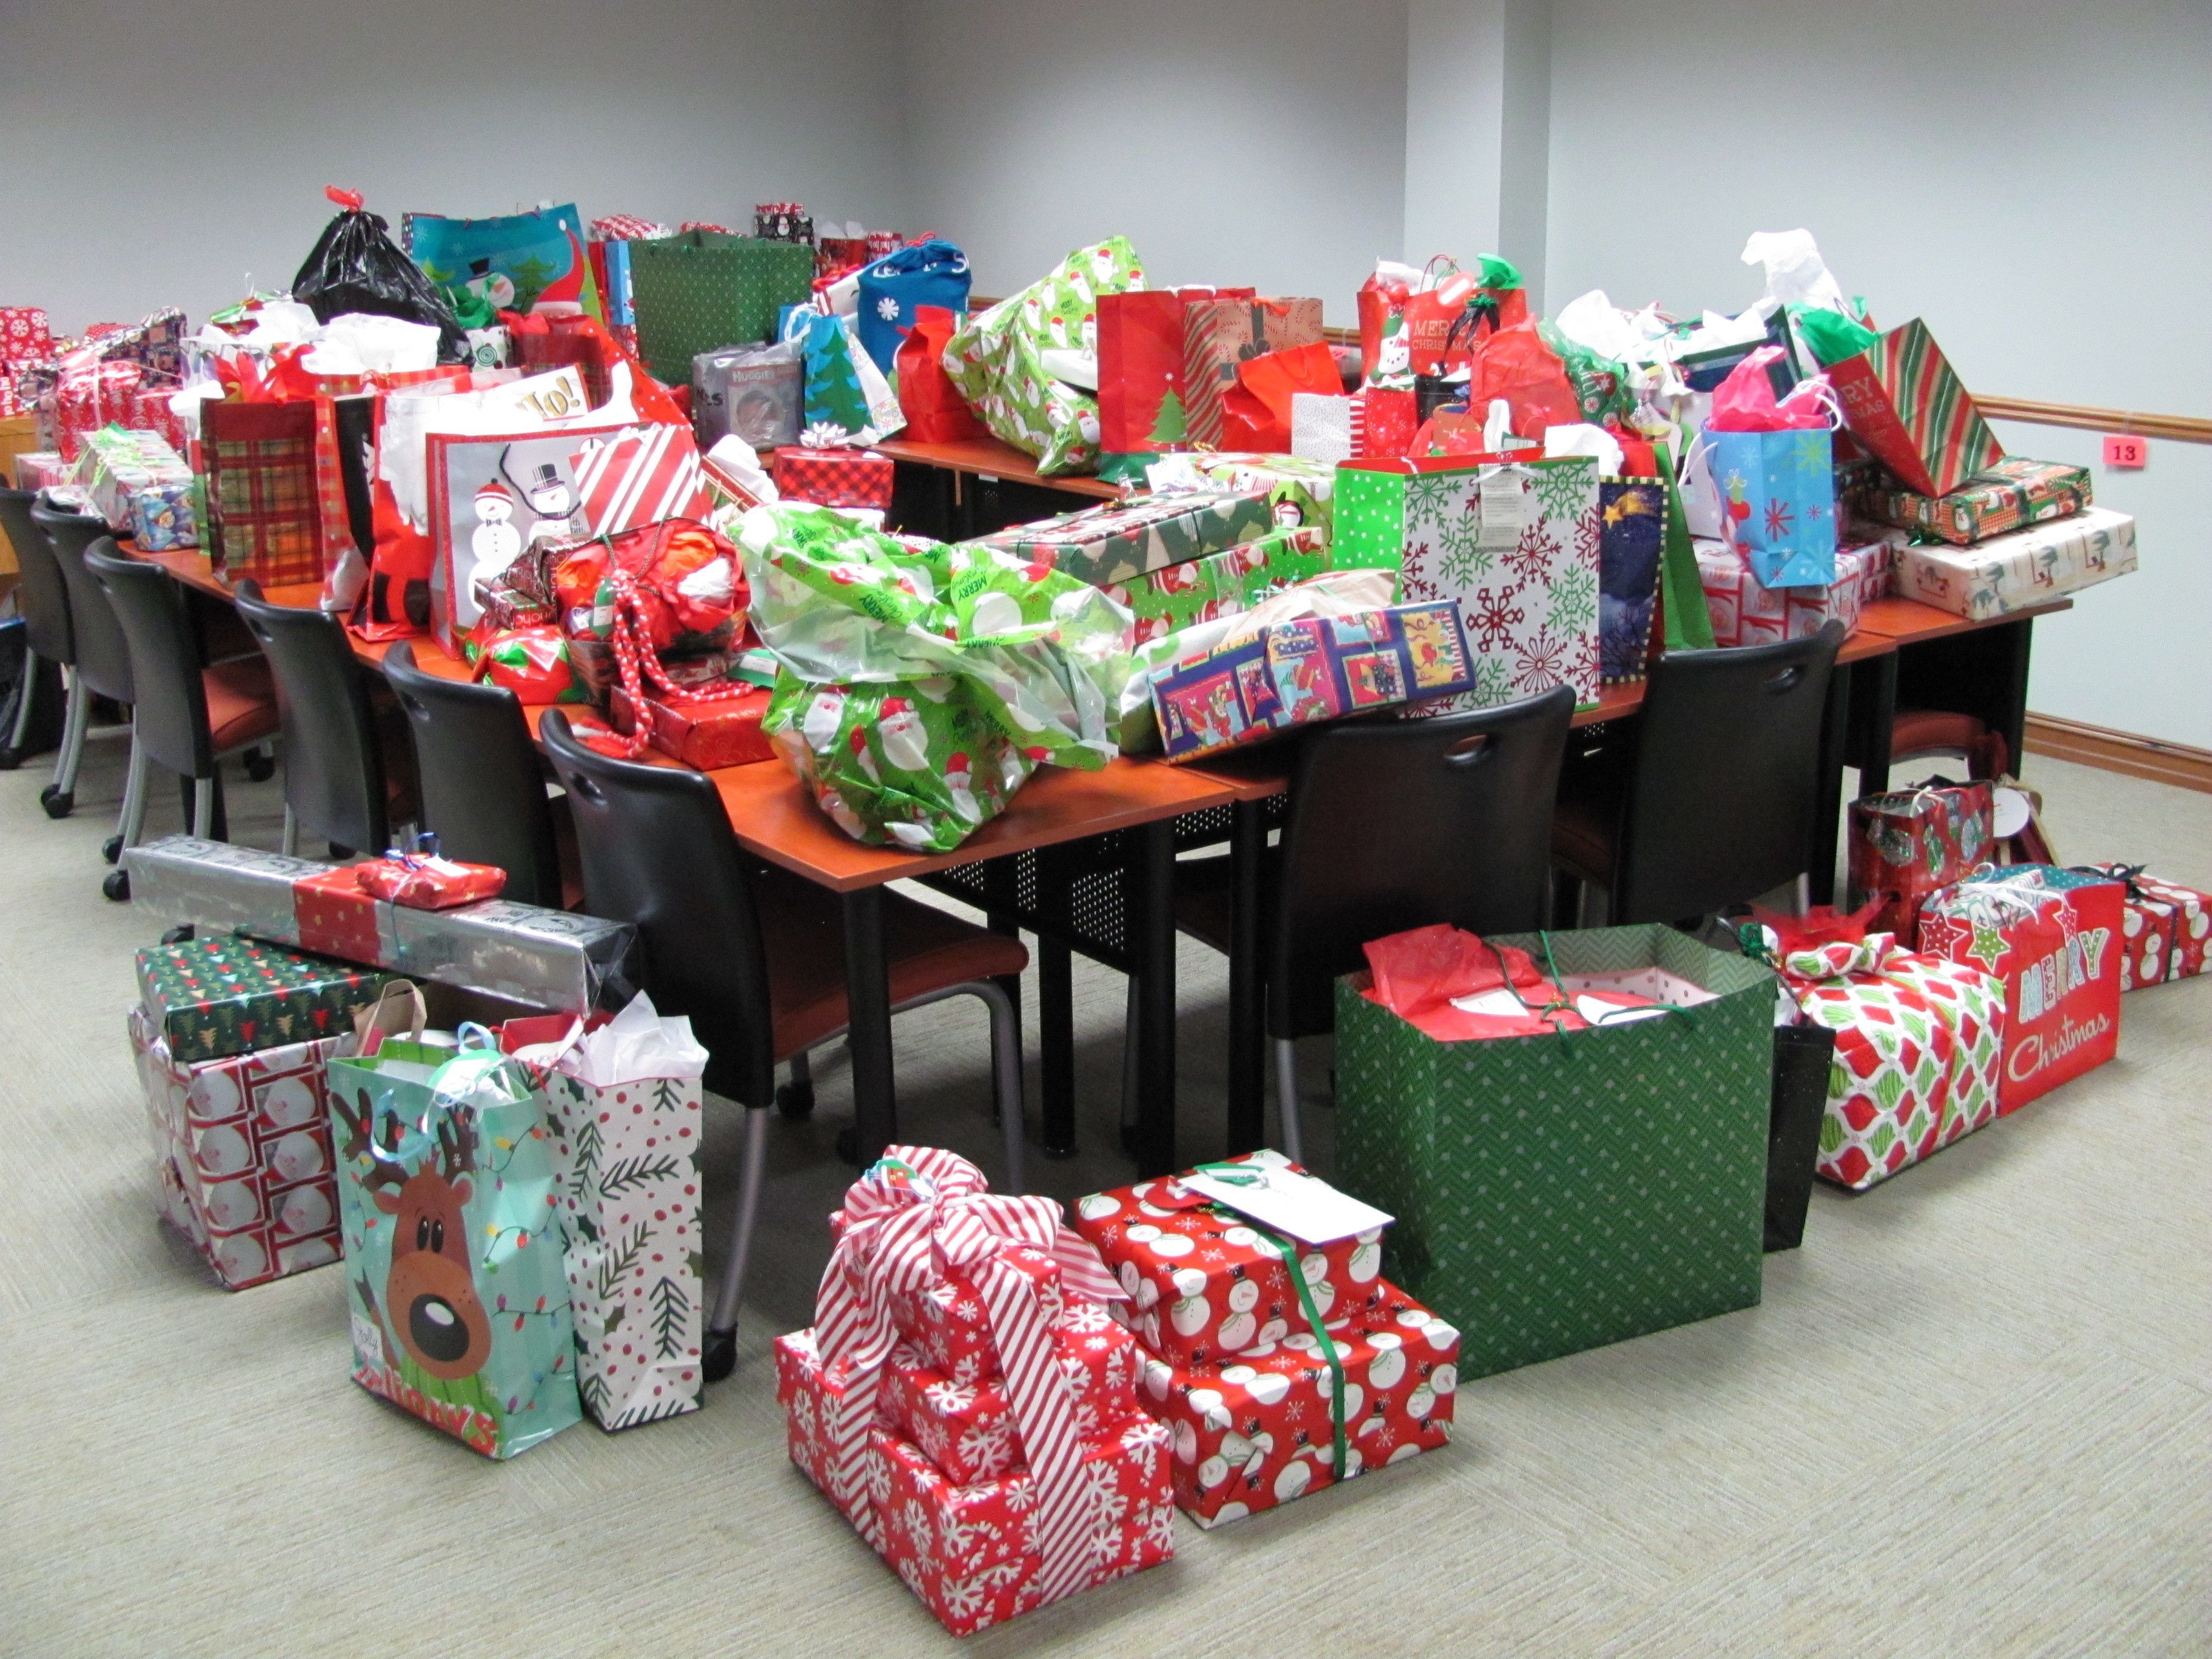 Gifts for Habitat Families Sit on Table.